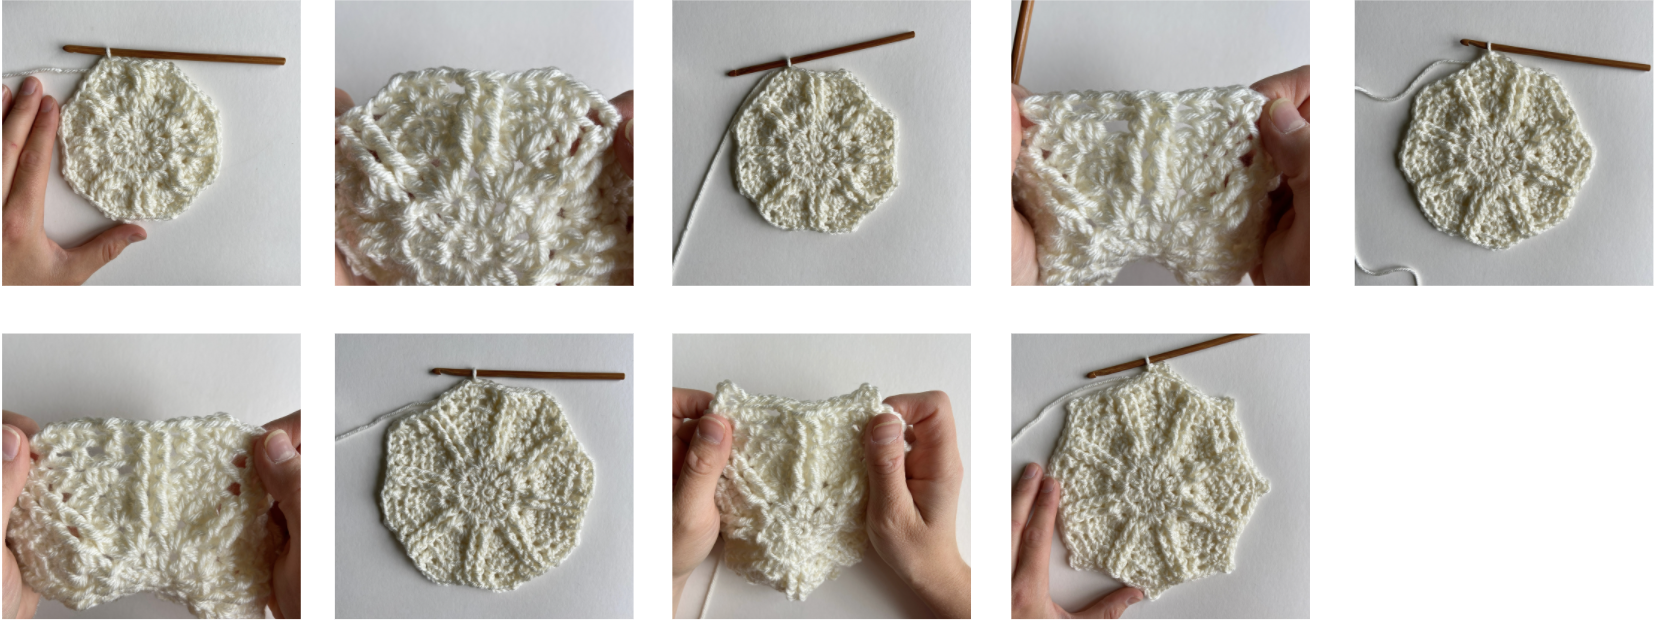 9 step by step images of a crochet octagon motif with front post stitches